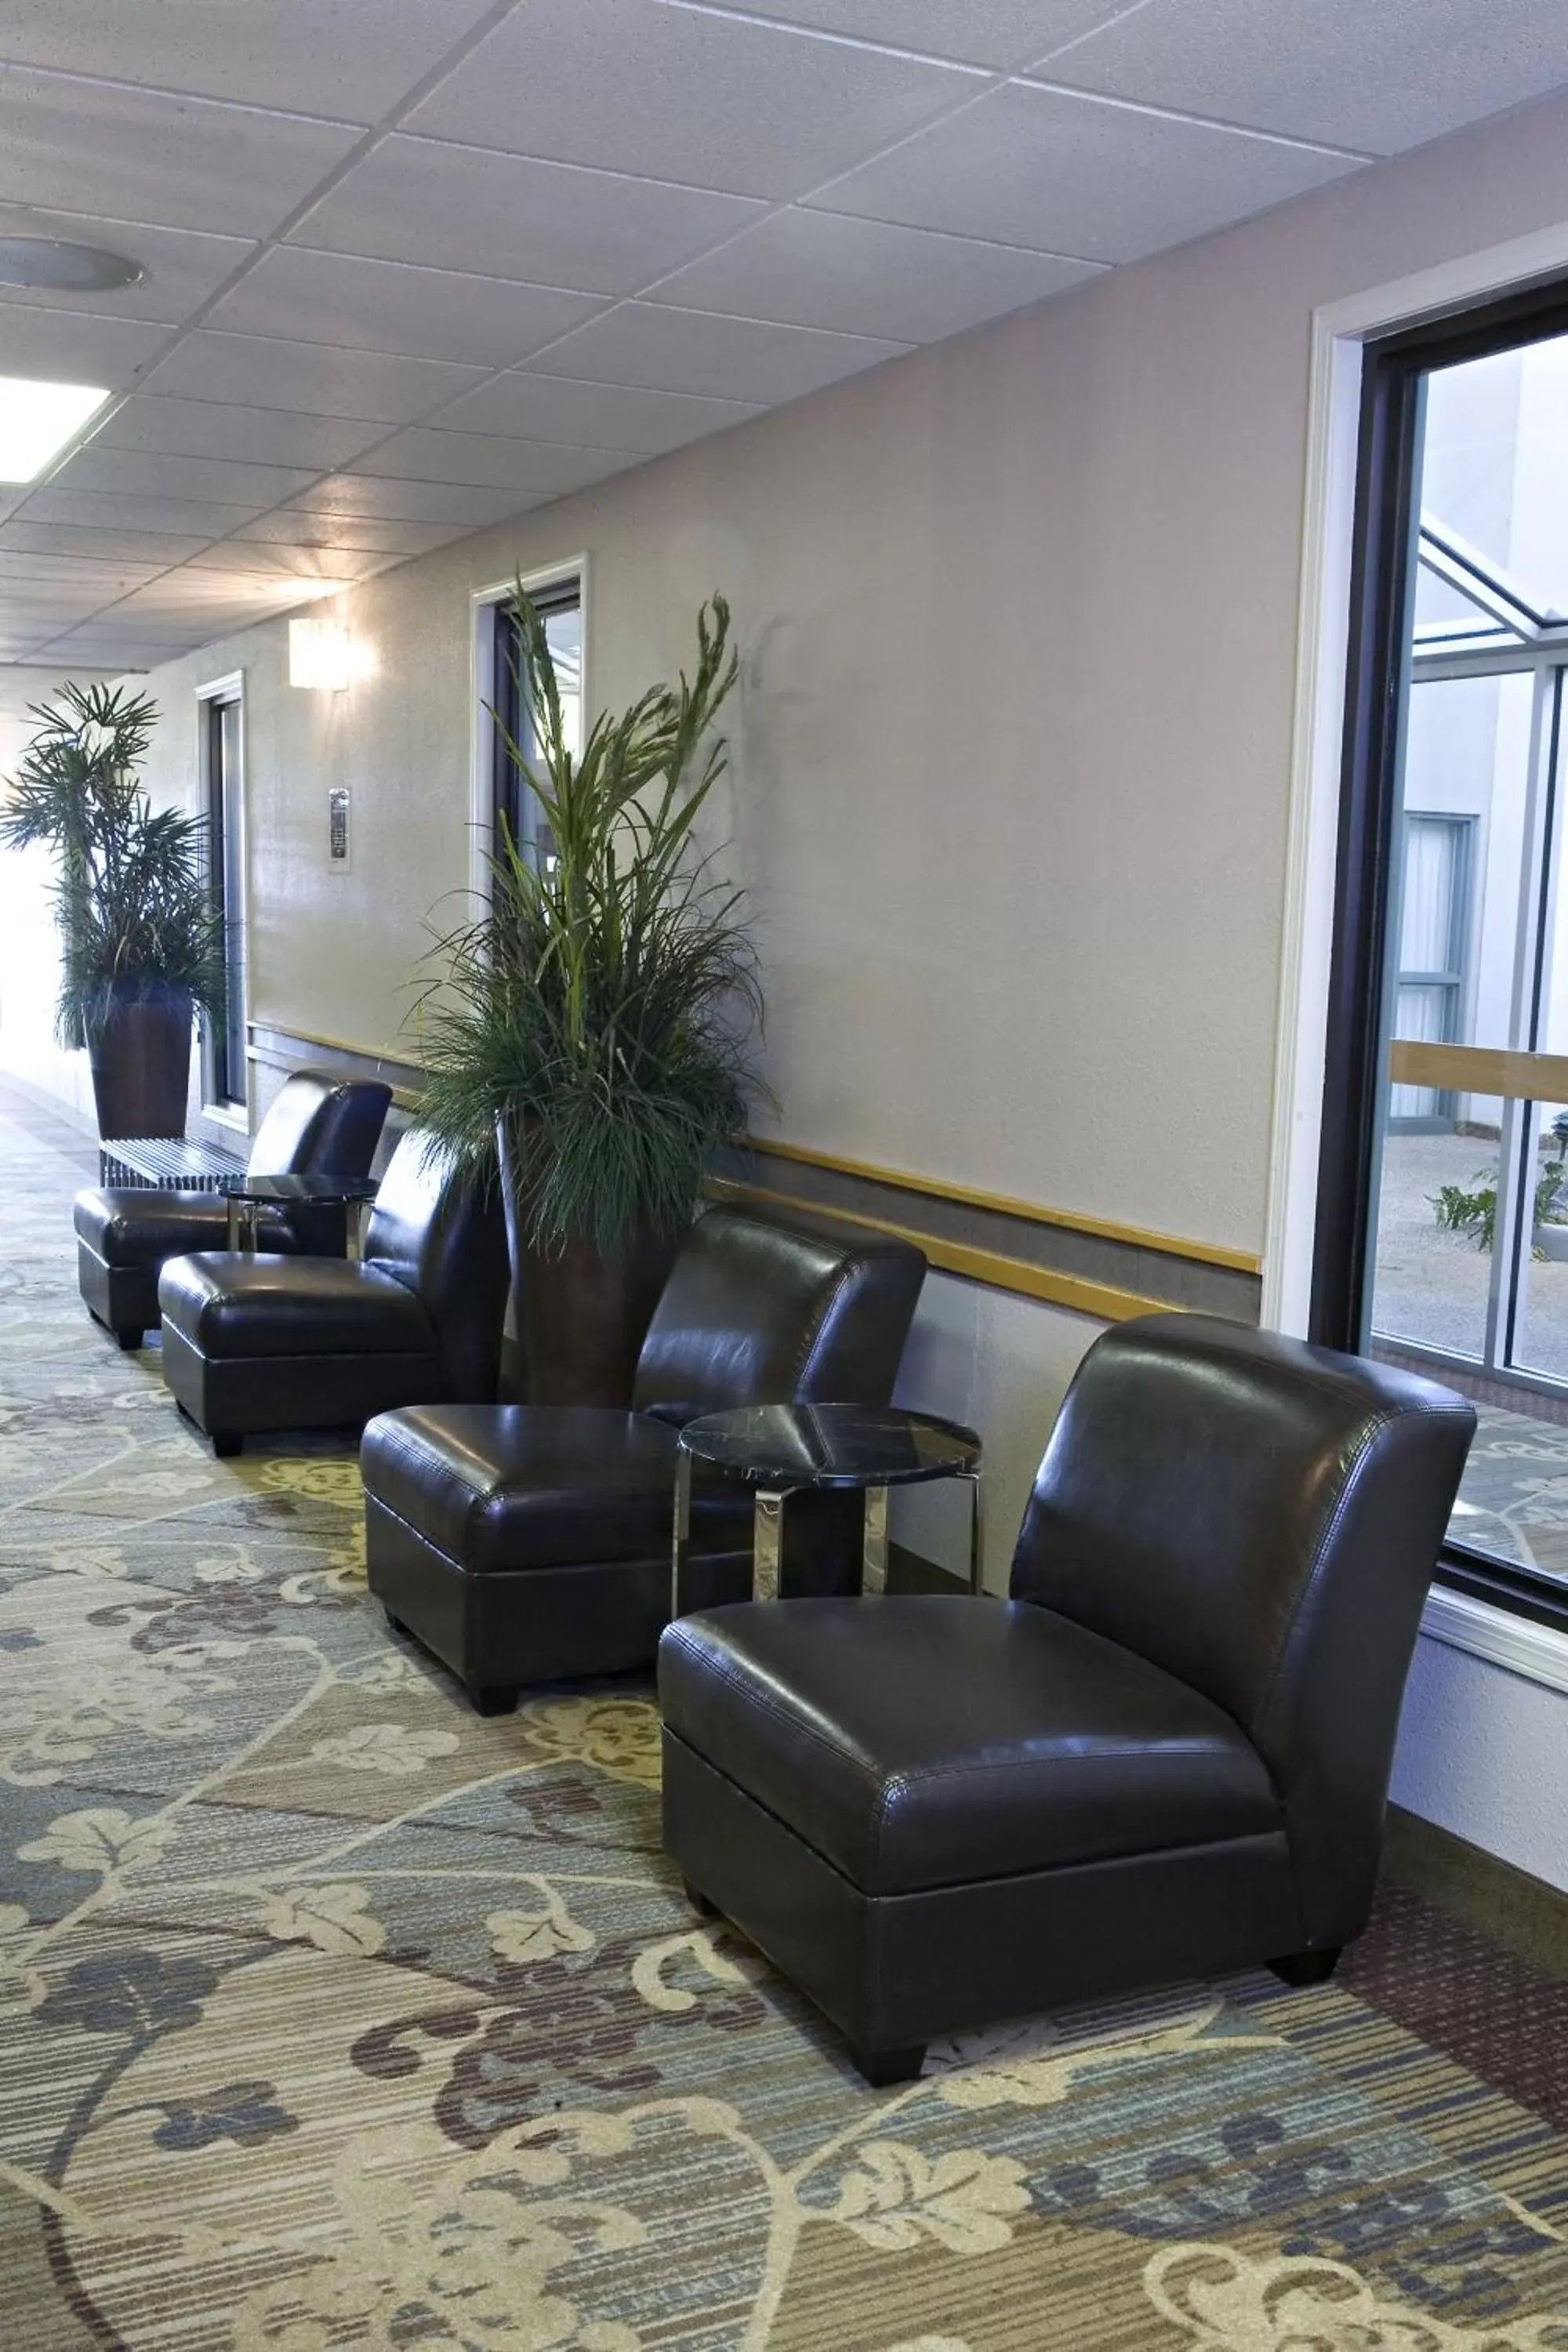 Area and facilities, Lobby/Reception in Heritage Inn Hotel & Convention Centre - Taber